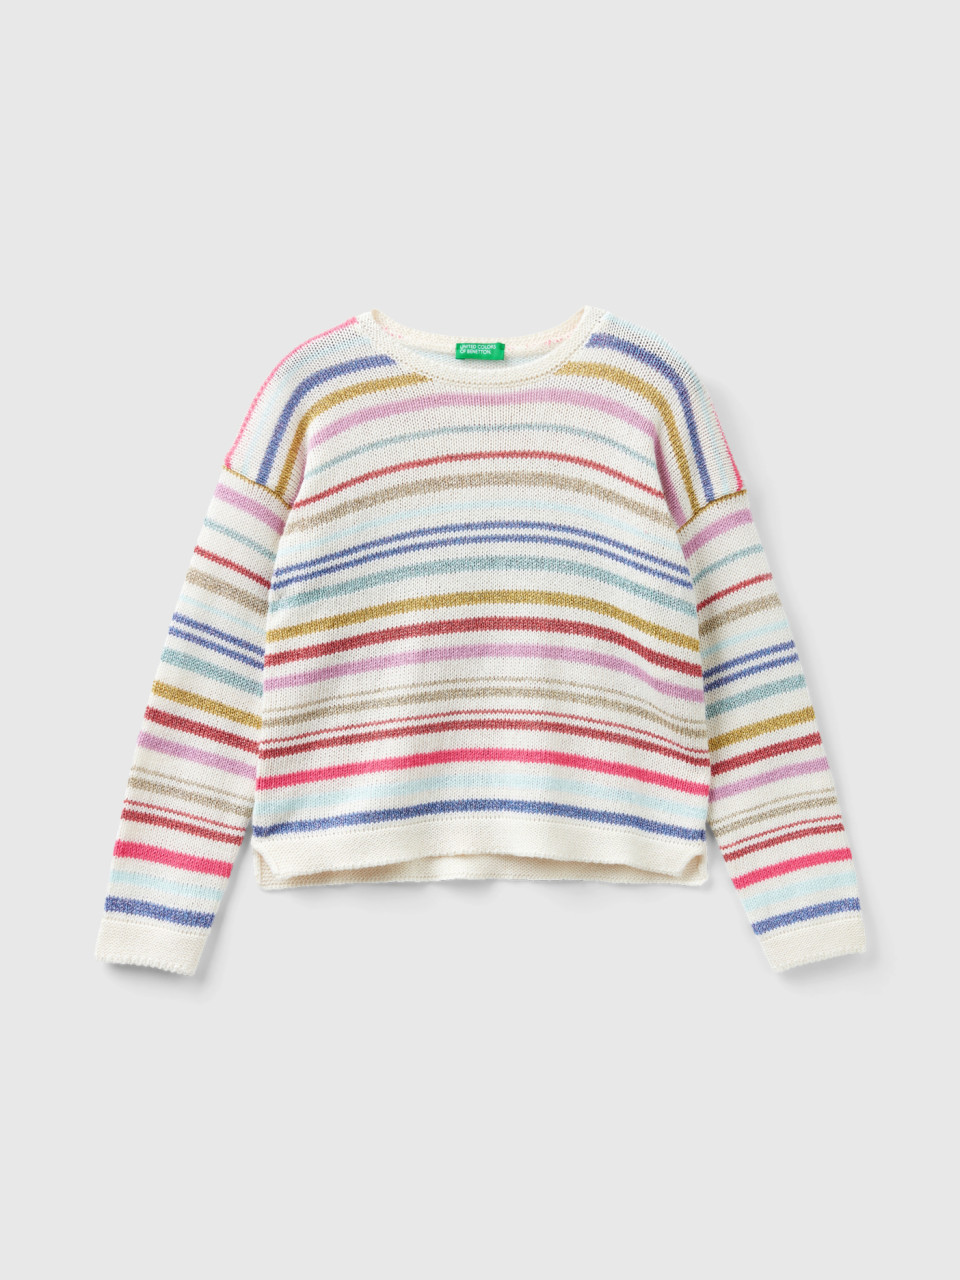 Benetton, Striped Sweater With Lurex, Multi-color, Kids